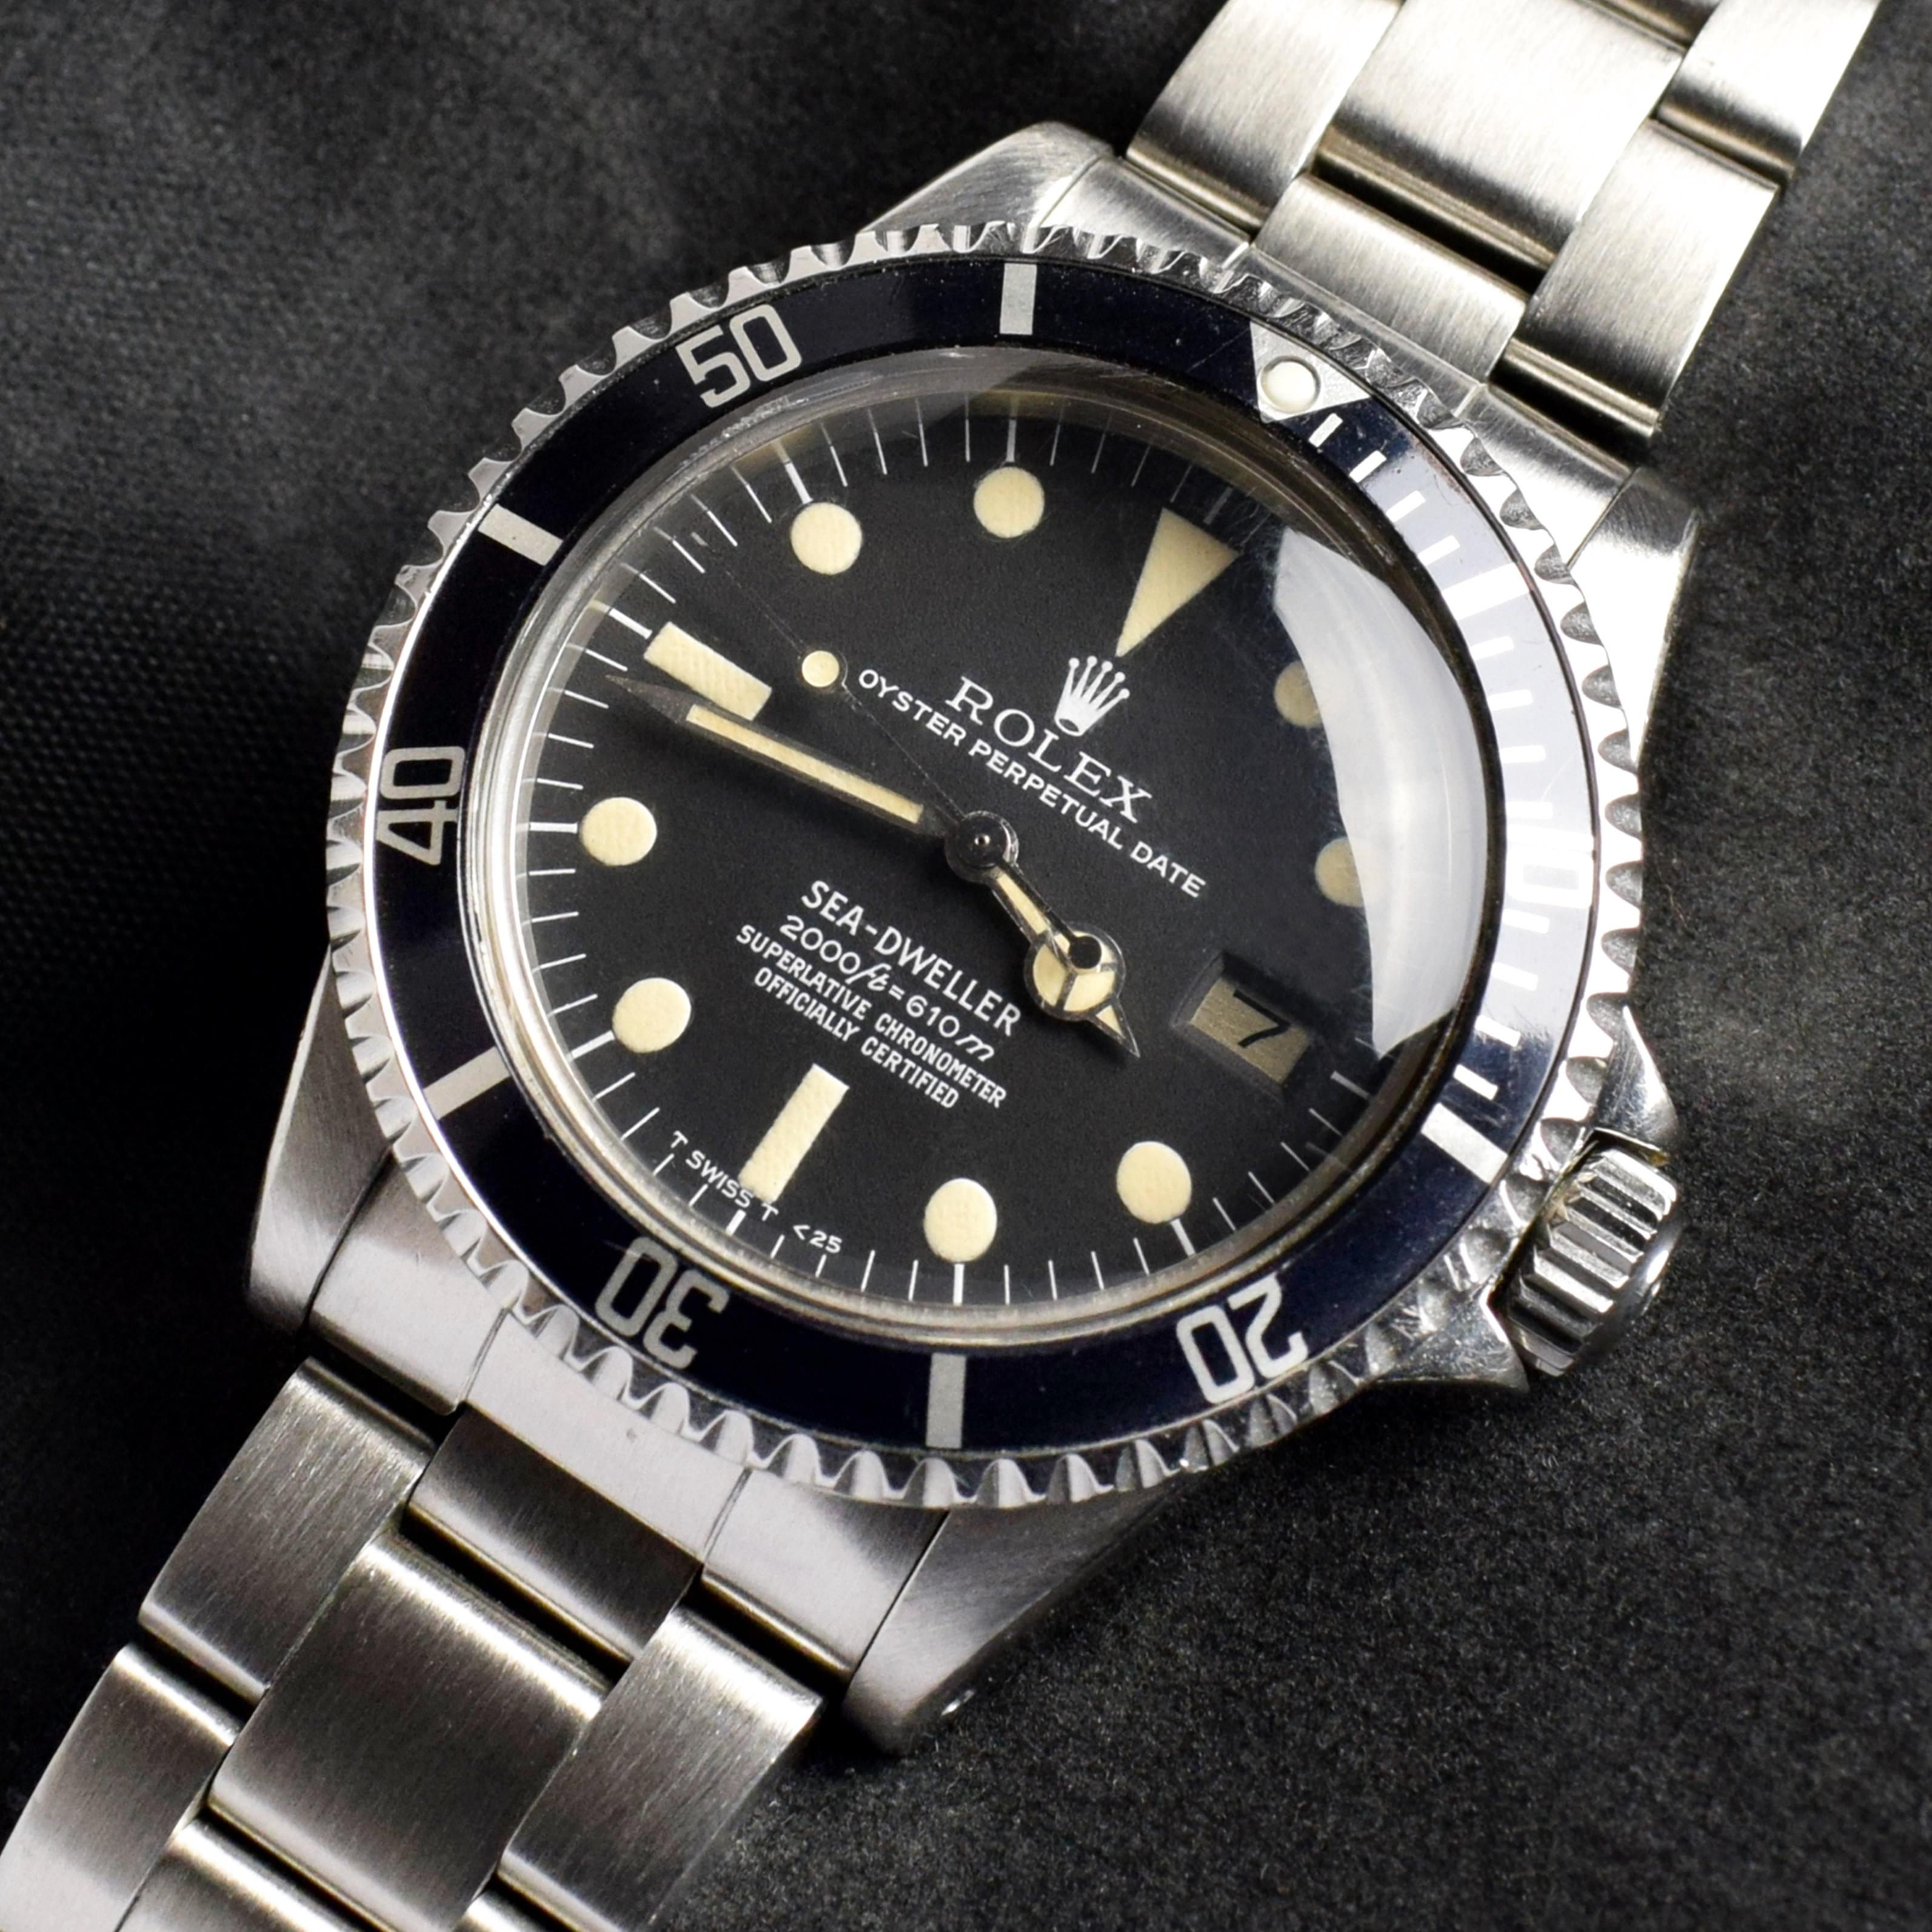 Brand: Vintage Rolex
Model: 1665
Year: 1978
Serial number: 57xxxxx
Reference: C03431

Case: Show sign of wear with slight polish from previous w/ 1665 stamped on inner case back

Dial: Excellent Clean Condition Matte Black Tritium Dial where the